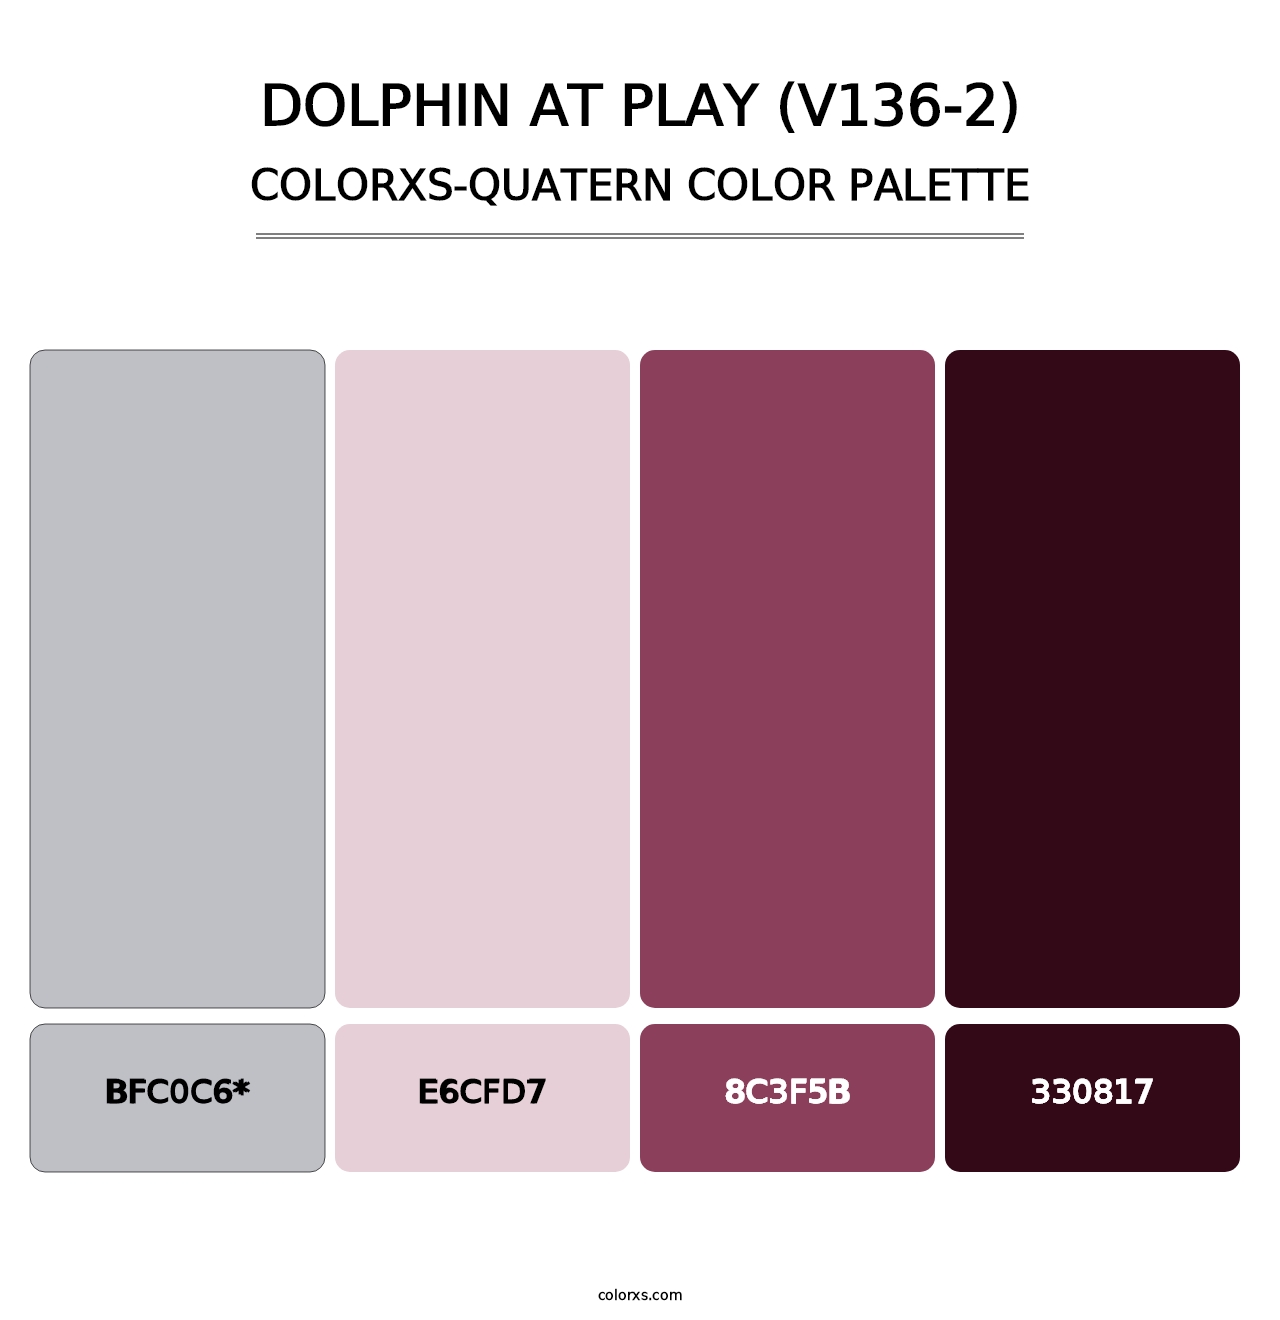 Dolphin at Play (V136-2) - Colorxs Quatern Palette